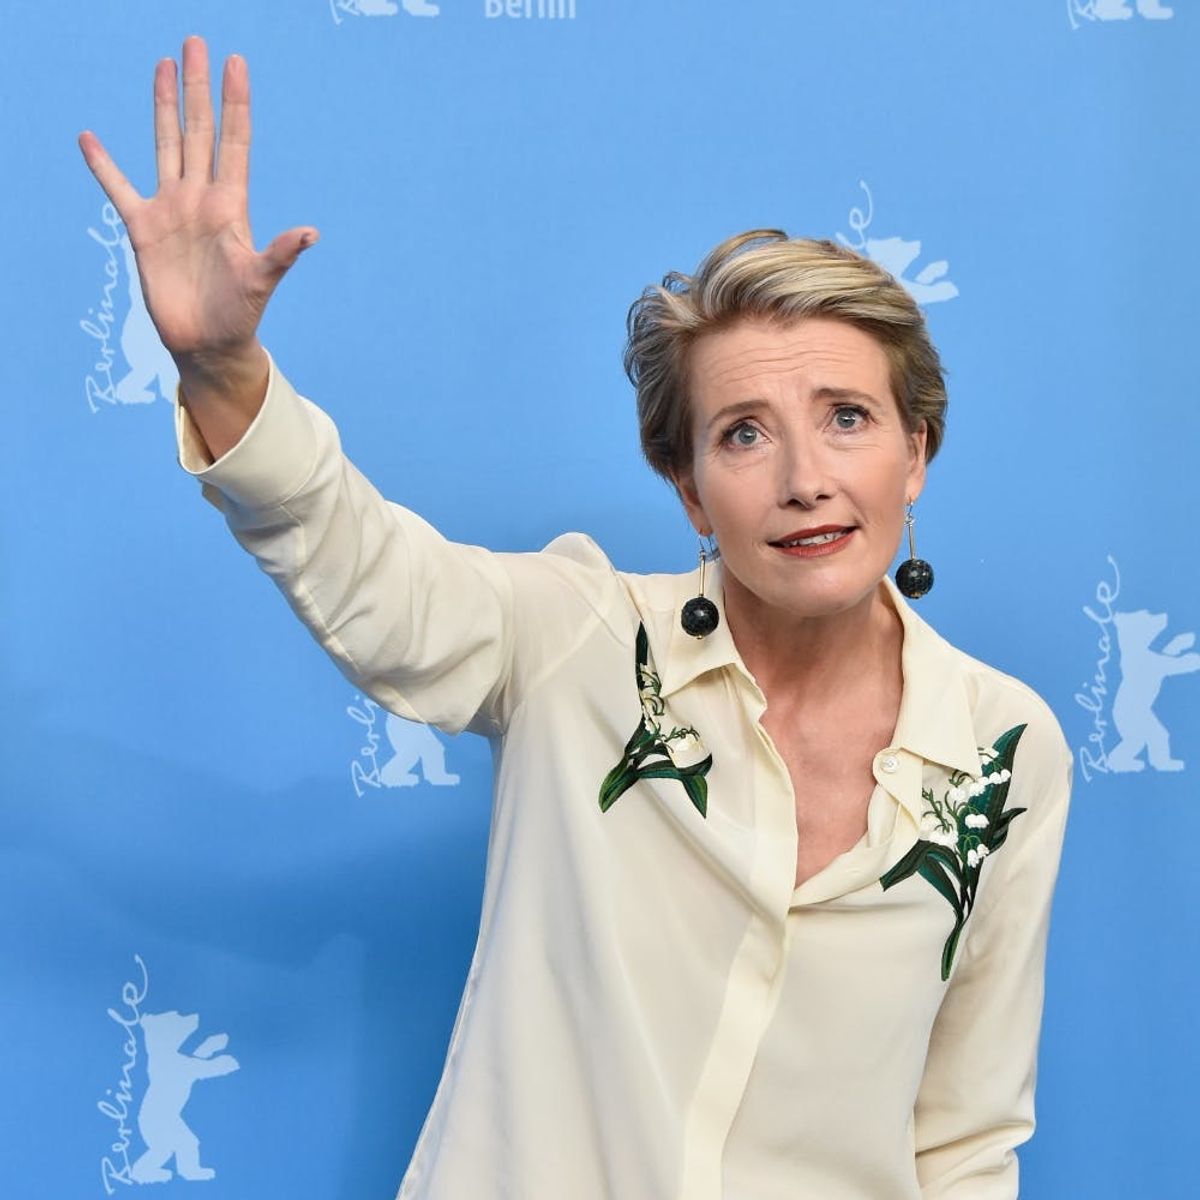 Emma Thompson Says Anorexia in Hollywood Is “Getting Worse”